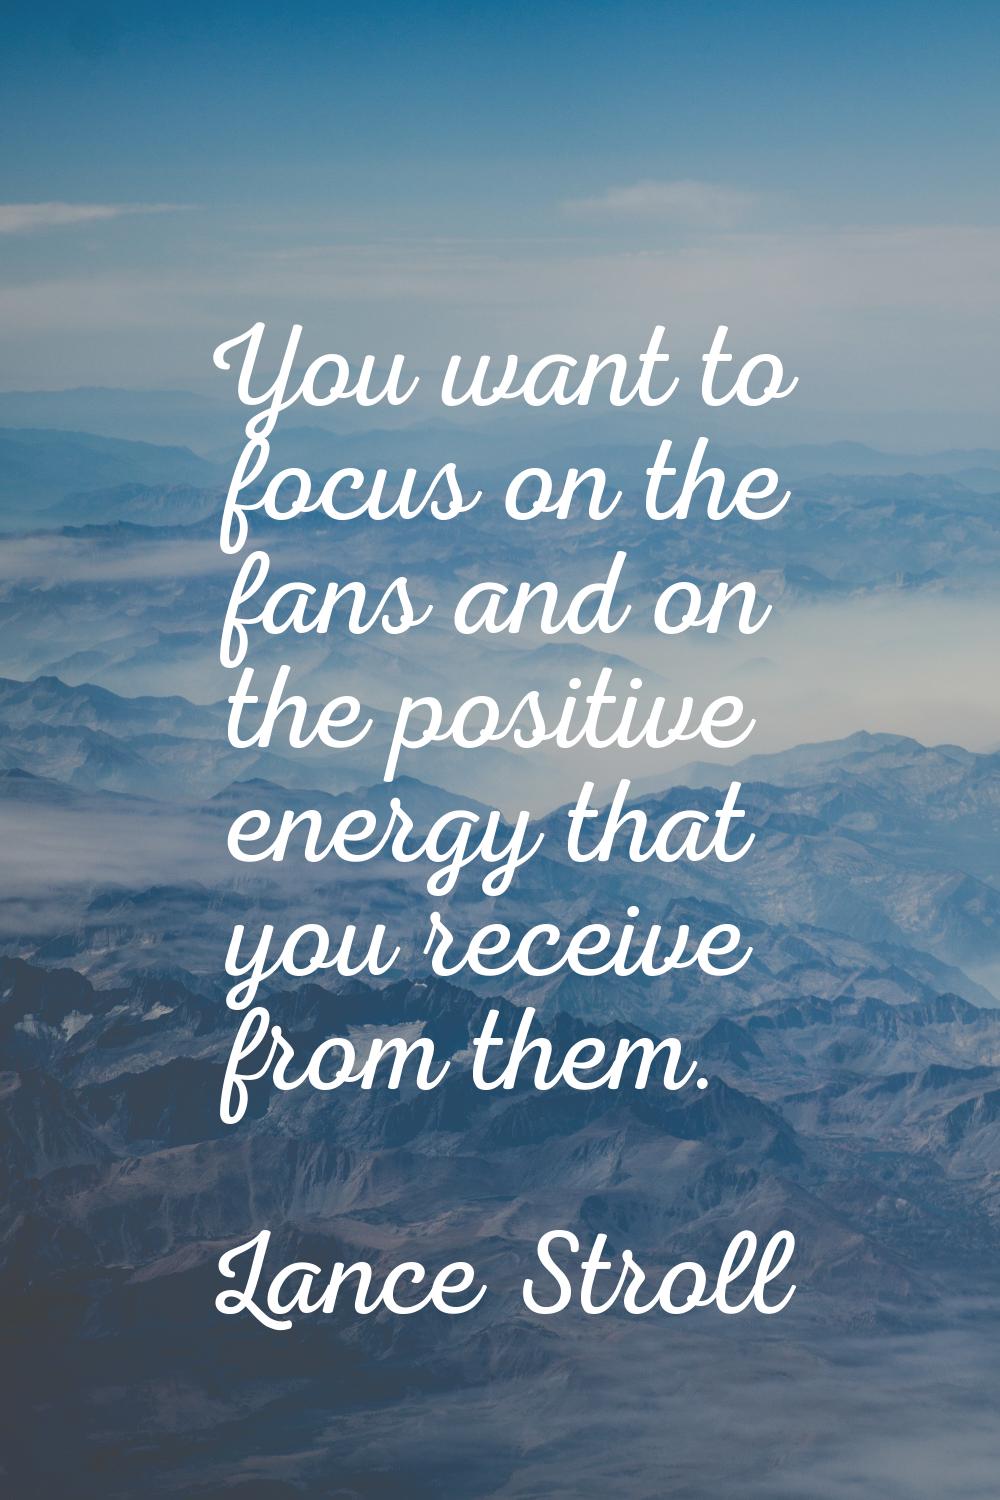 You want to focus on the fans and on the positive energy that you receive from them.